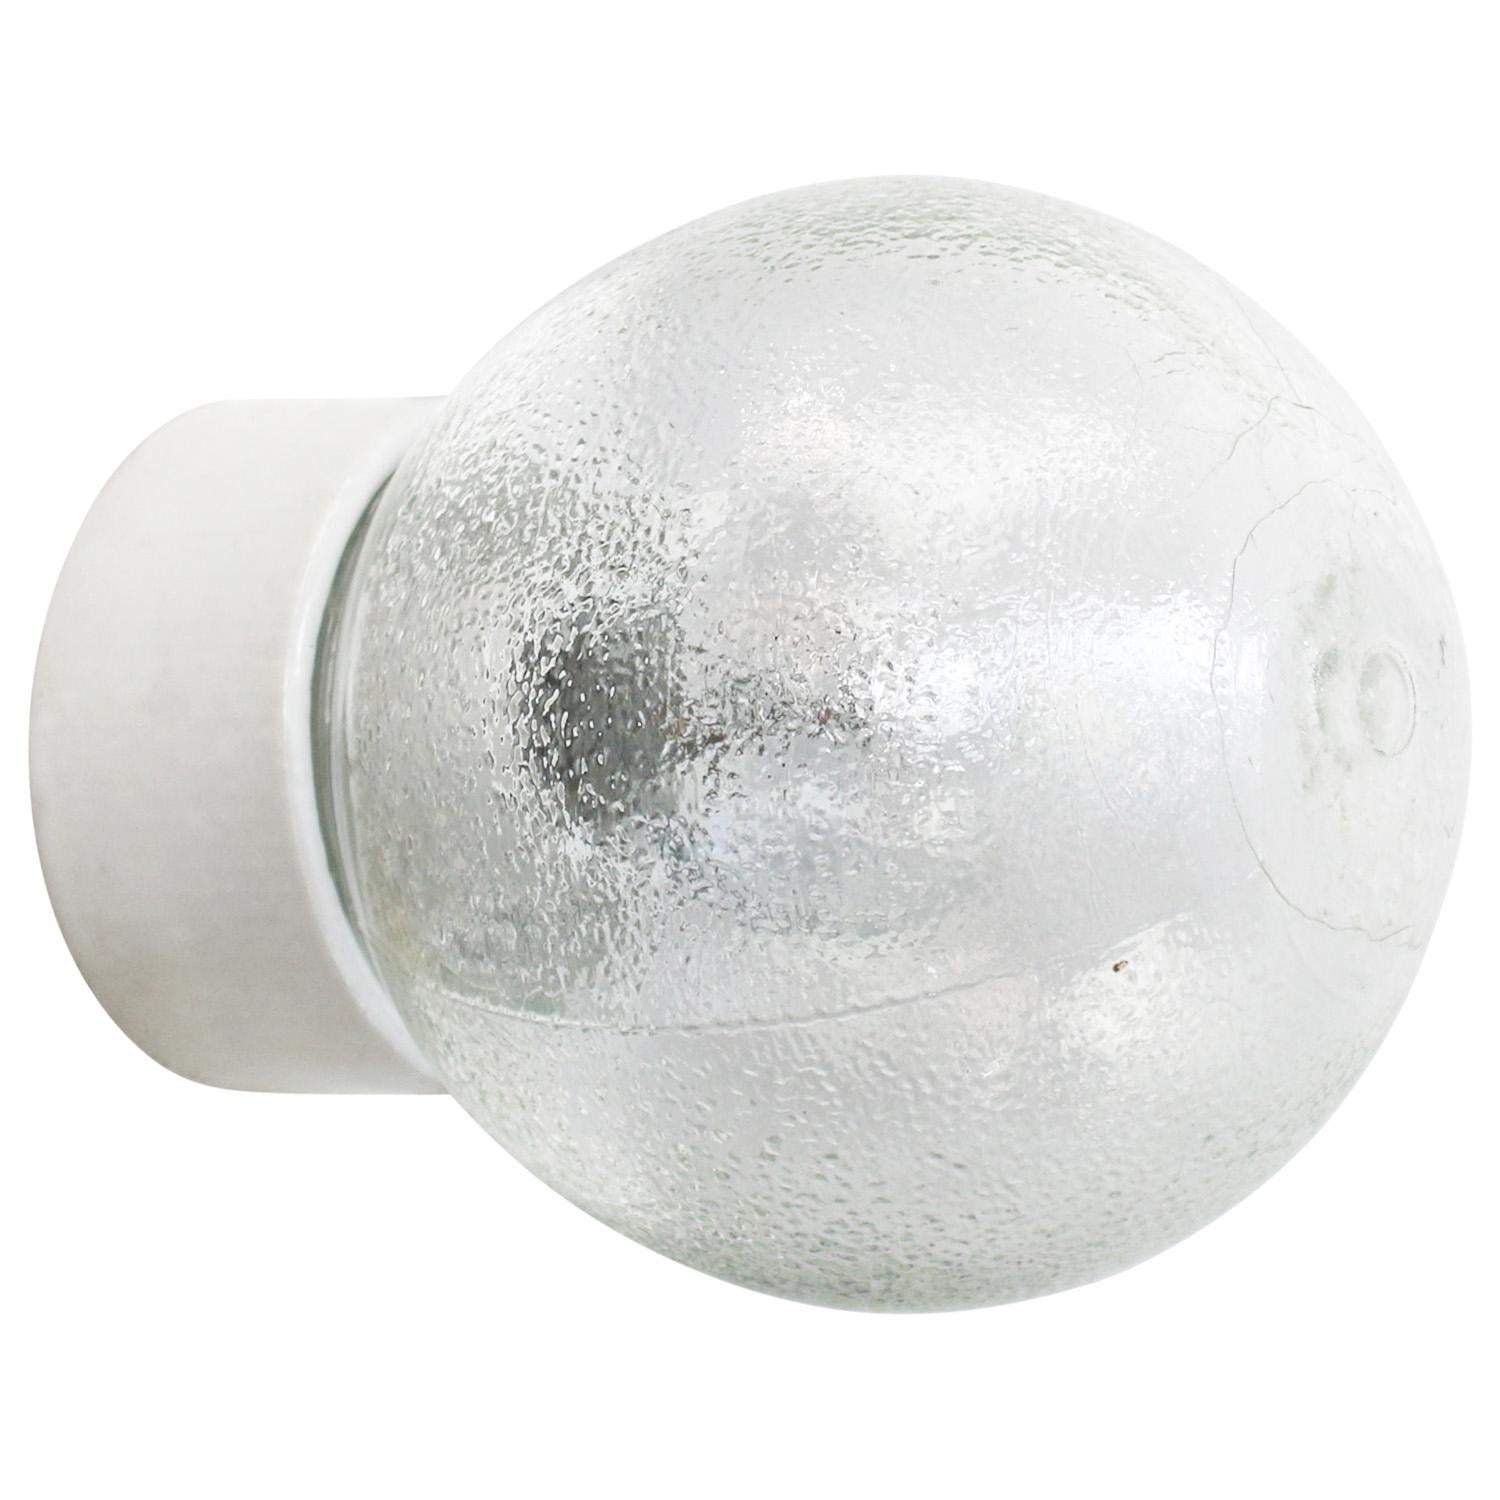 Industrial ceiling lamp.
White porcelain, frosted glass.

2 conductors, no ground.
Measures: Diameter foot 10 cm
Suitable for 110 volt USA
new wiring is CE certified (220 volt)  or UL Listed (110 volt) 

Weight: 1.1 kg / 2.4 lb

Priced per